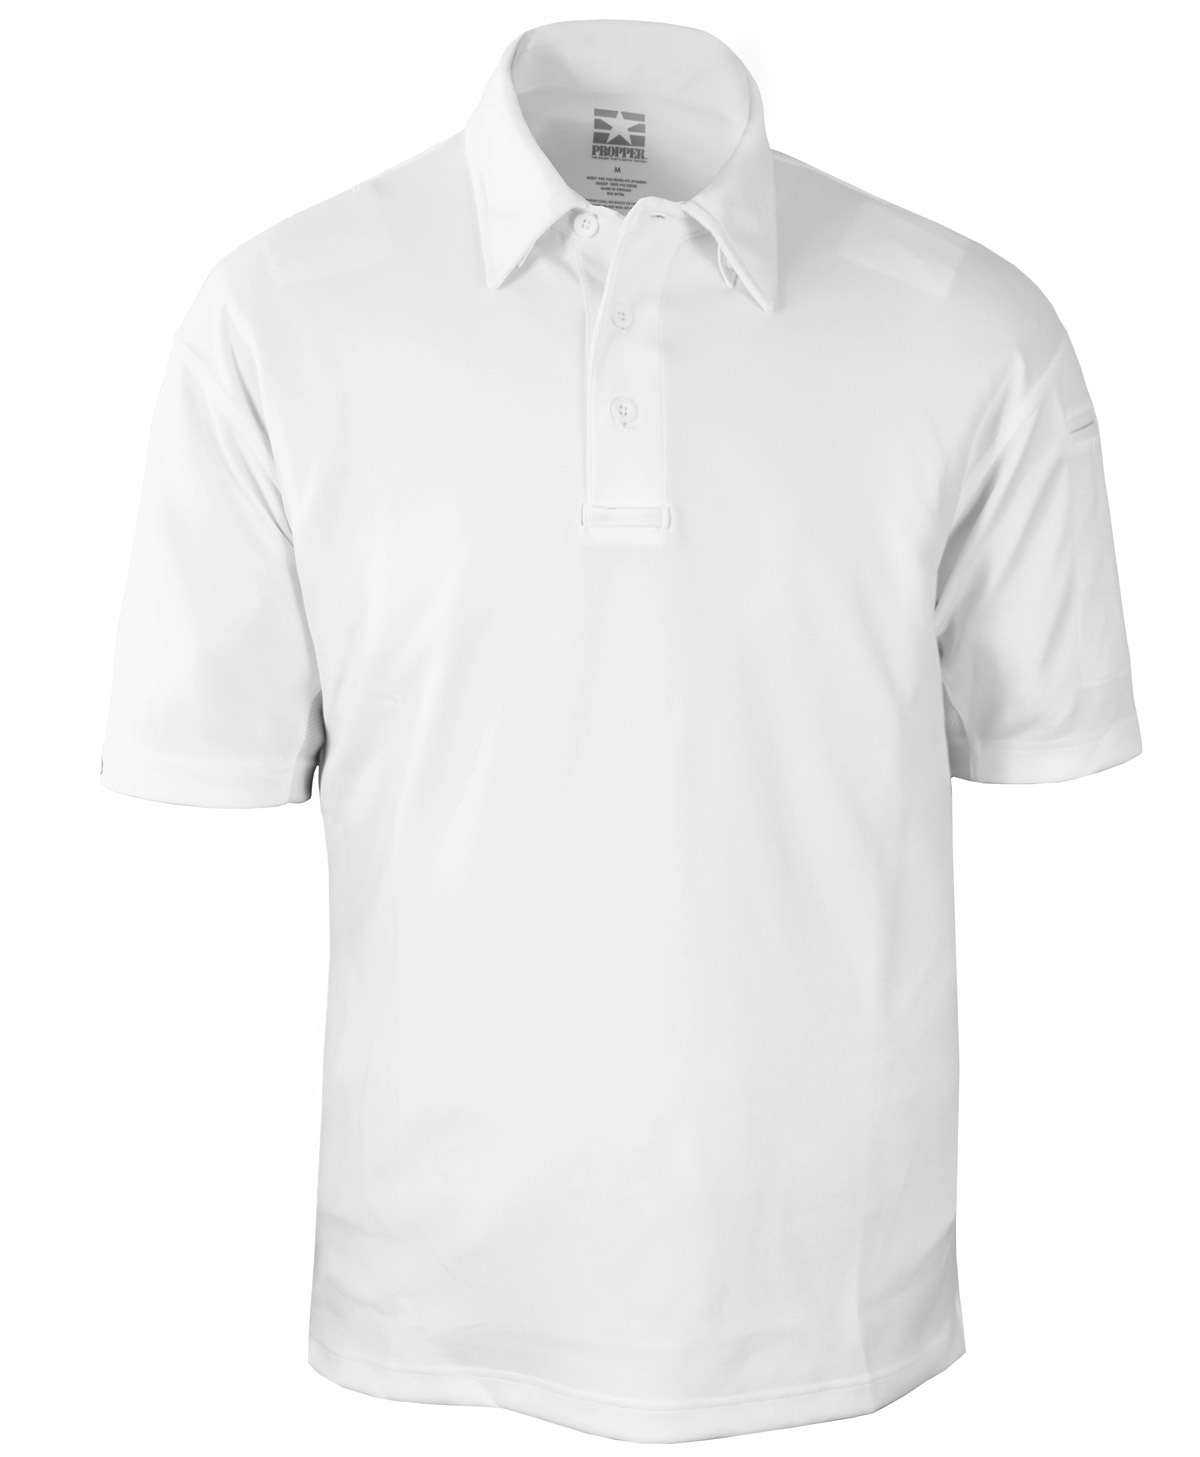  -  "Ice Perfomance Polo" White Propper